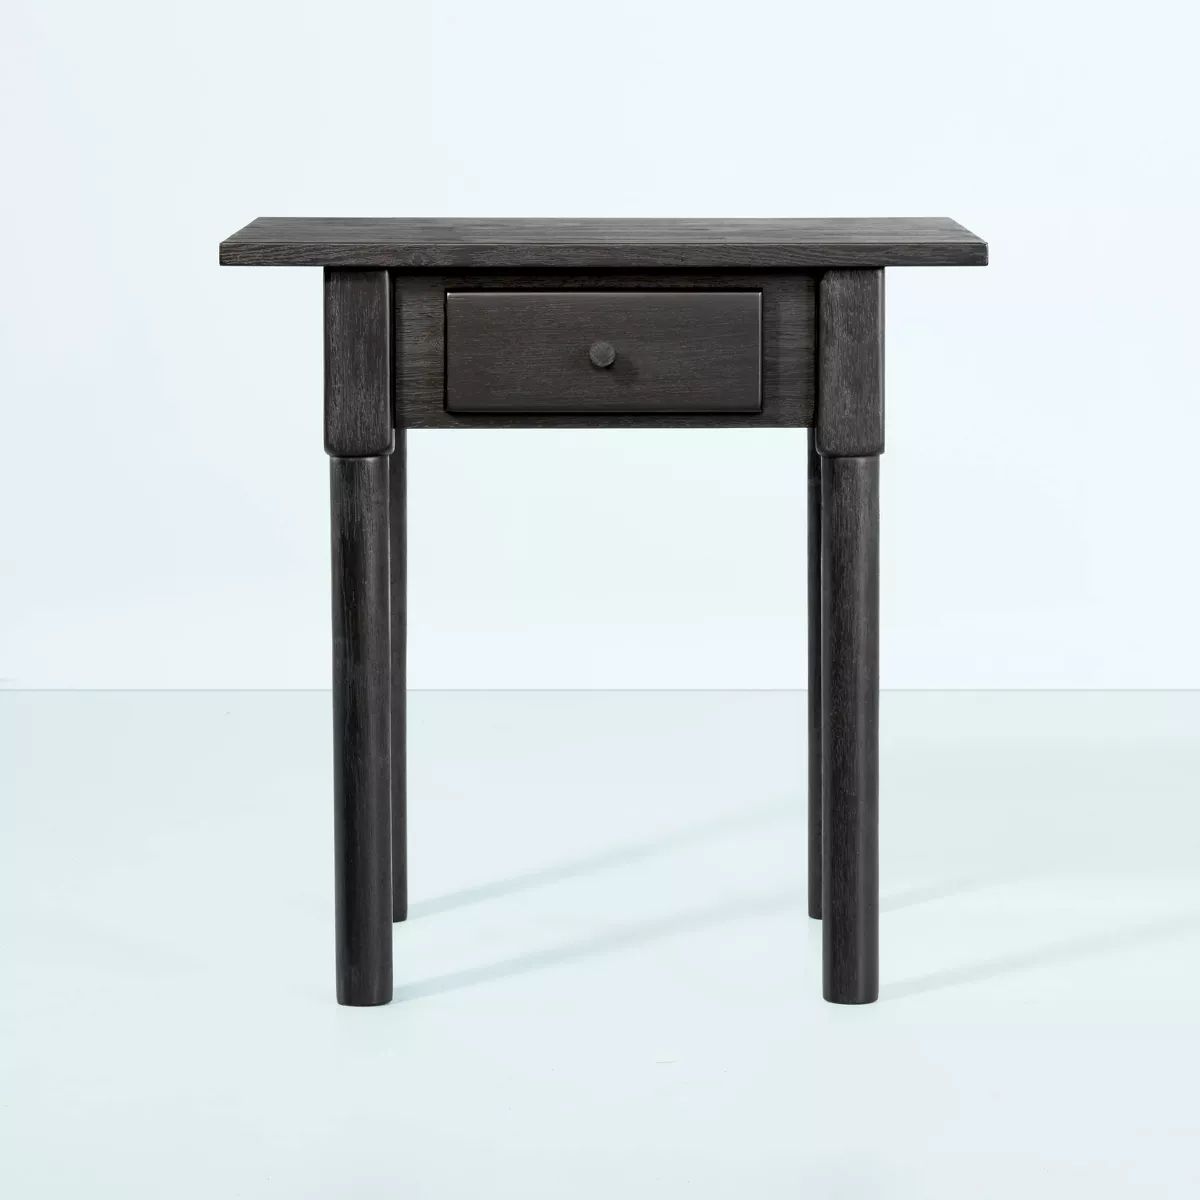 Wood Turned Leg Accent Table with Drawer - Black - Hearth & Hand™ with Magnolia | Target